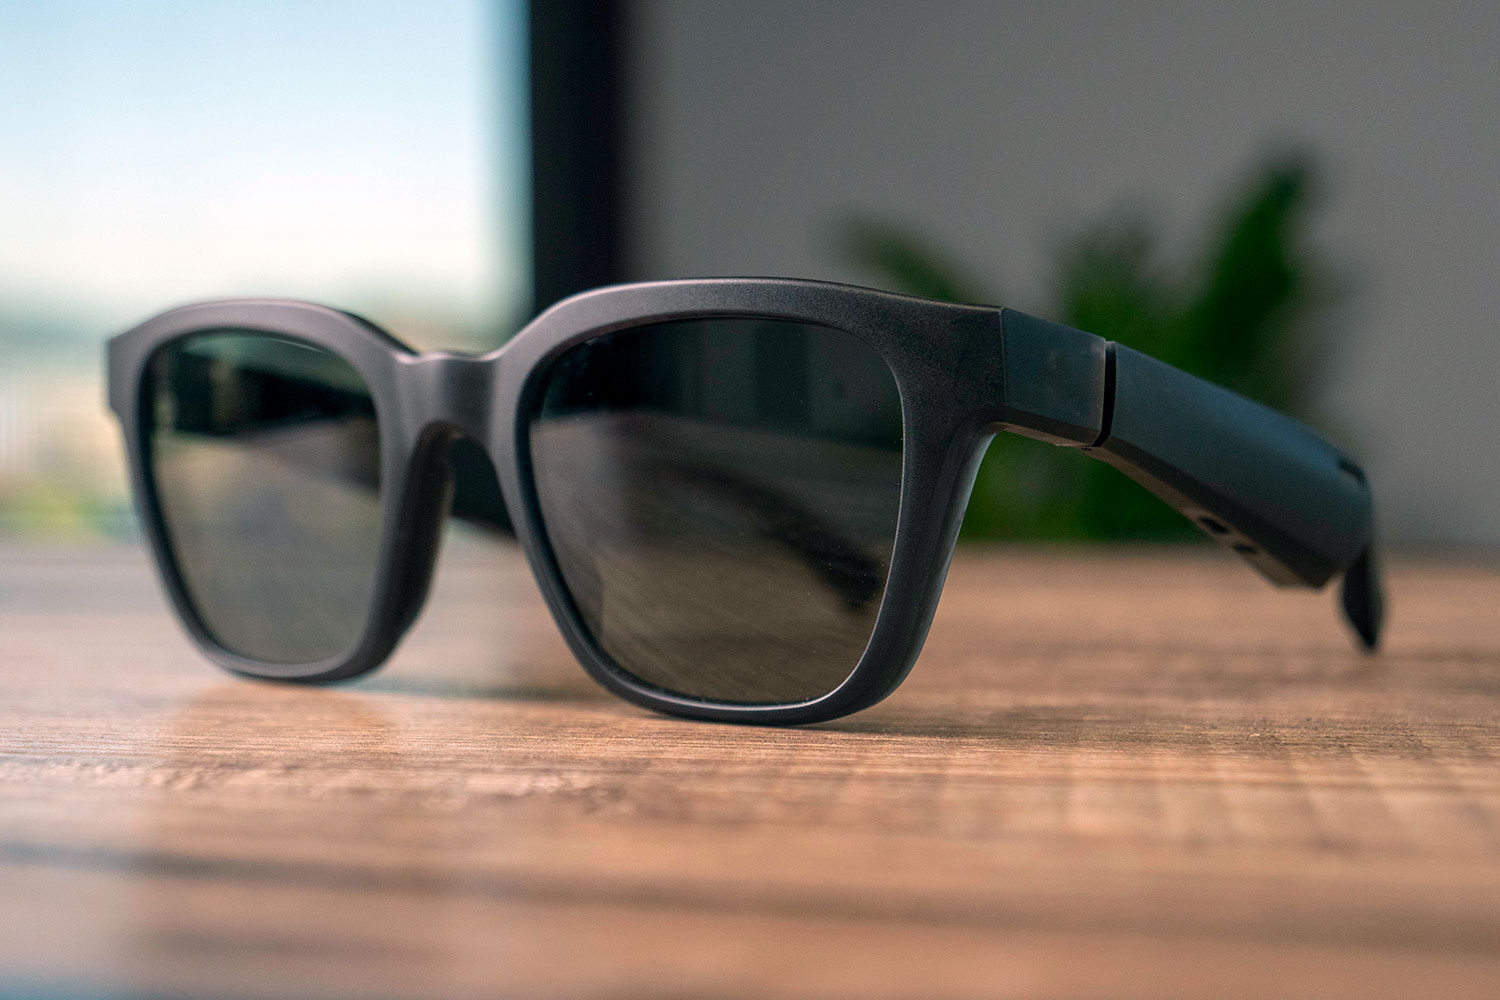 Bose Frames Review | Limited Applications, Brilliant Potential